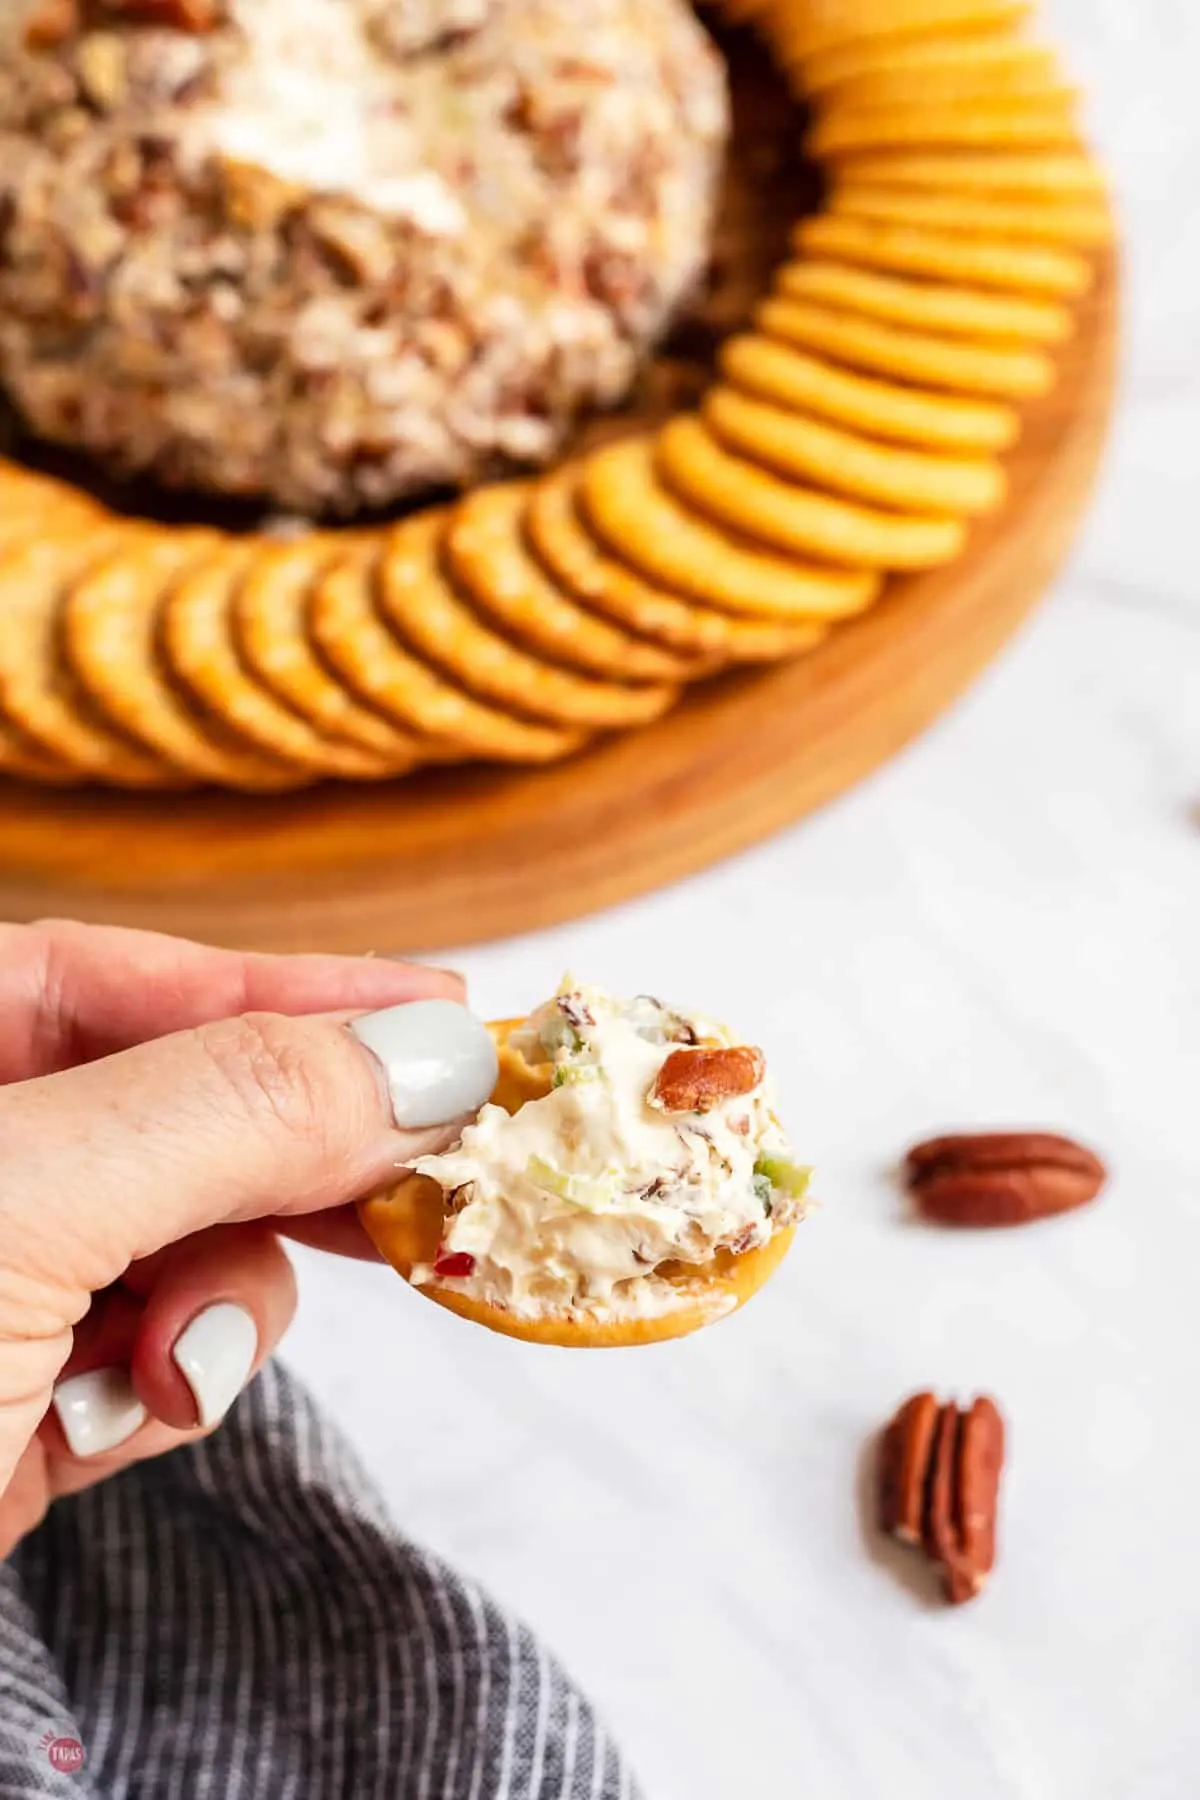 cracker smeared with pineapple cheese ball